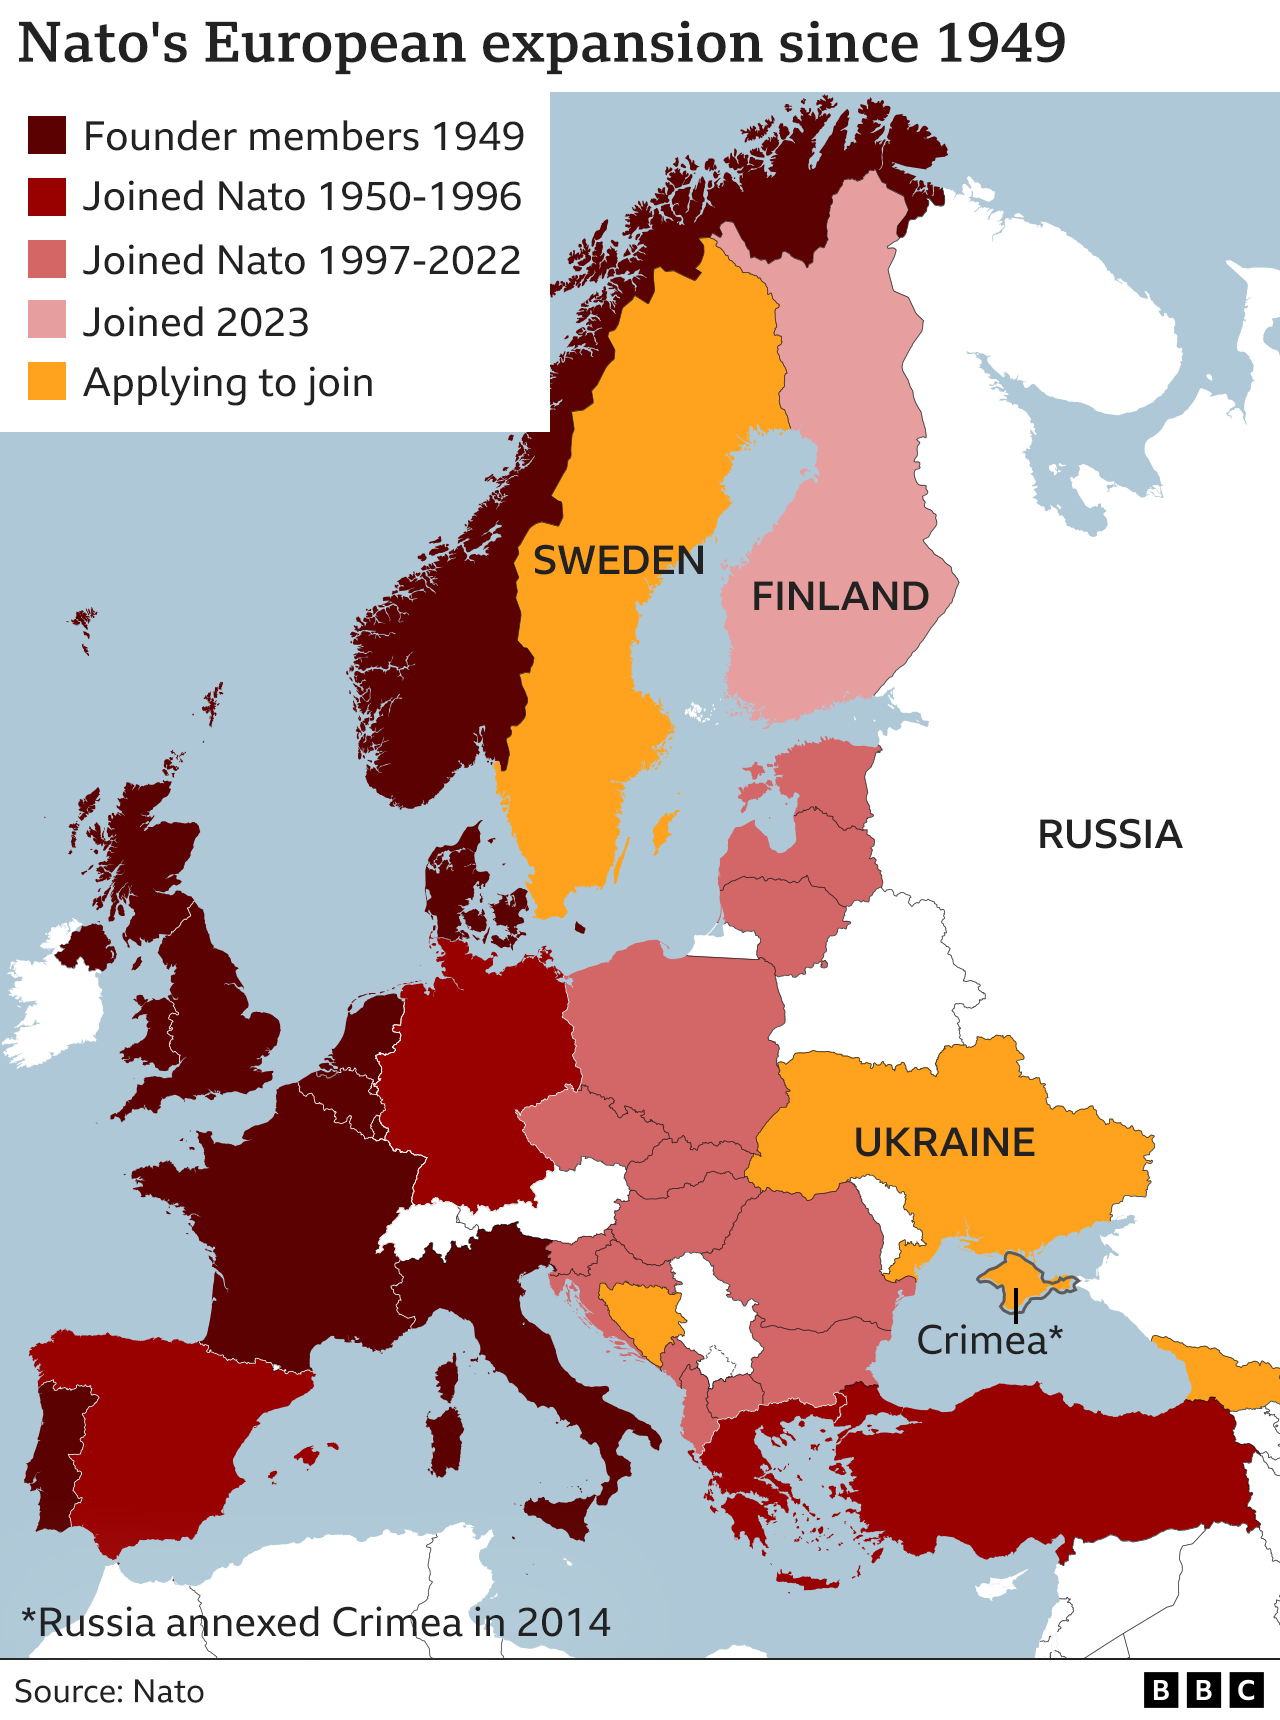 Map showing Nato member states, including those which have joined since 1997 (Albania, Bulgaria, Czech Republic, Hungary, Poland, Romania, Slovakia, Latvia, Lithuania, Estonia) and those applying to join now (Sweden, Ukraine, Georgia, Bosnia & Herzegovina) (map used from July 2022)